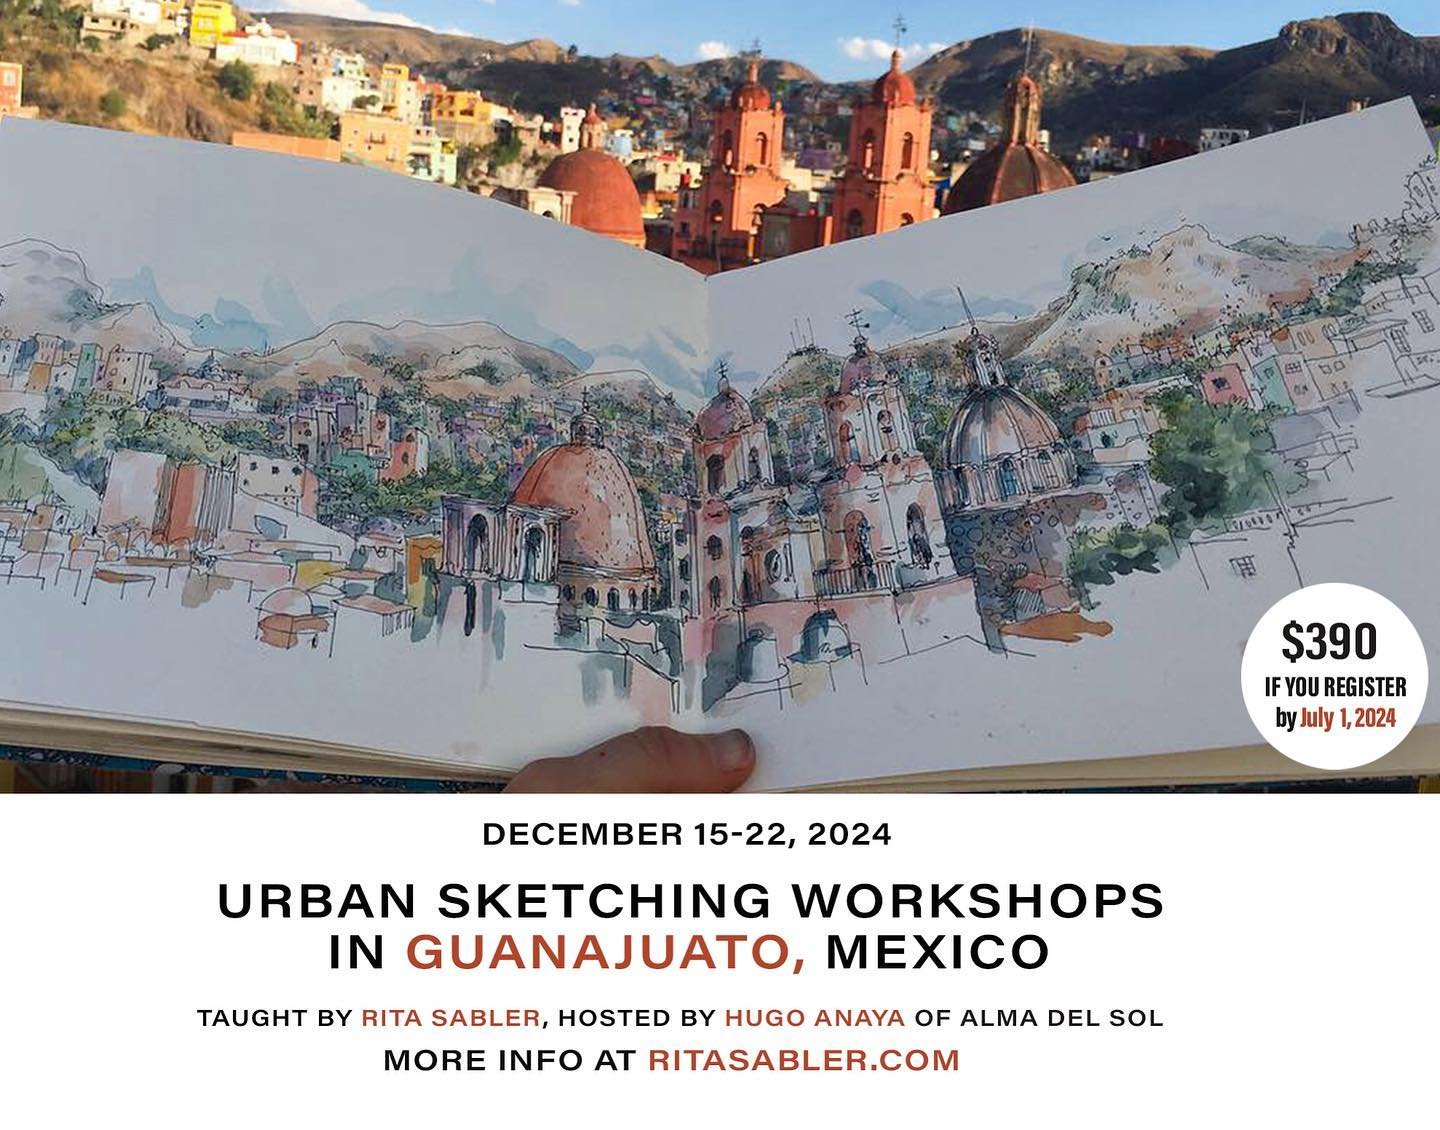 Friends, here is a great opportunity to delve deep into Urban sketching on a budget. We are heading to the Pueblo Magico of Guanajuato, Mexico at the end of this year. Hugo Anaya, a local artist and printmaker will be our host. I only have a couple o